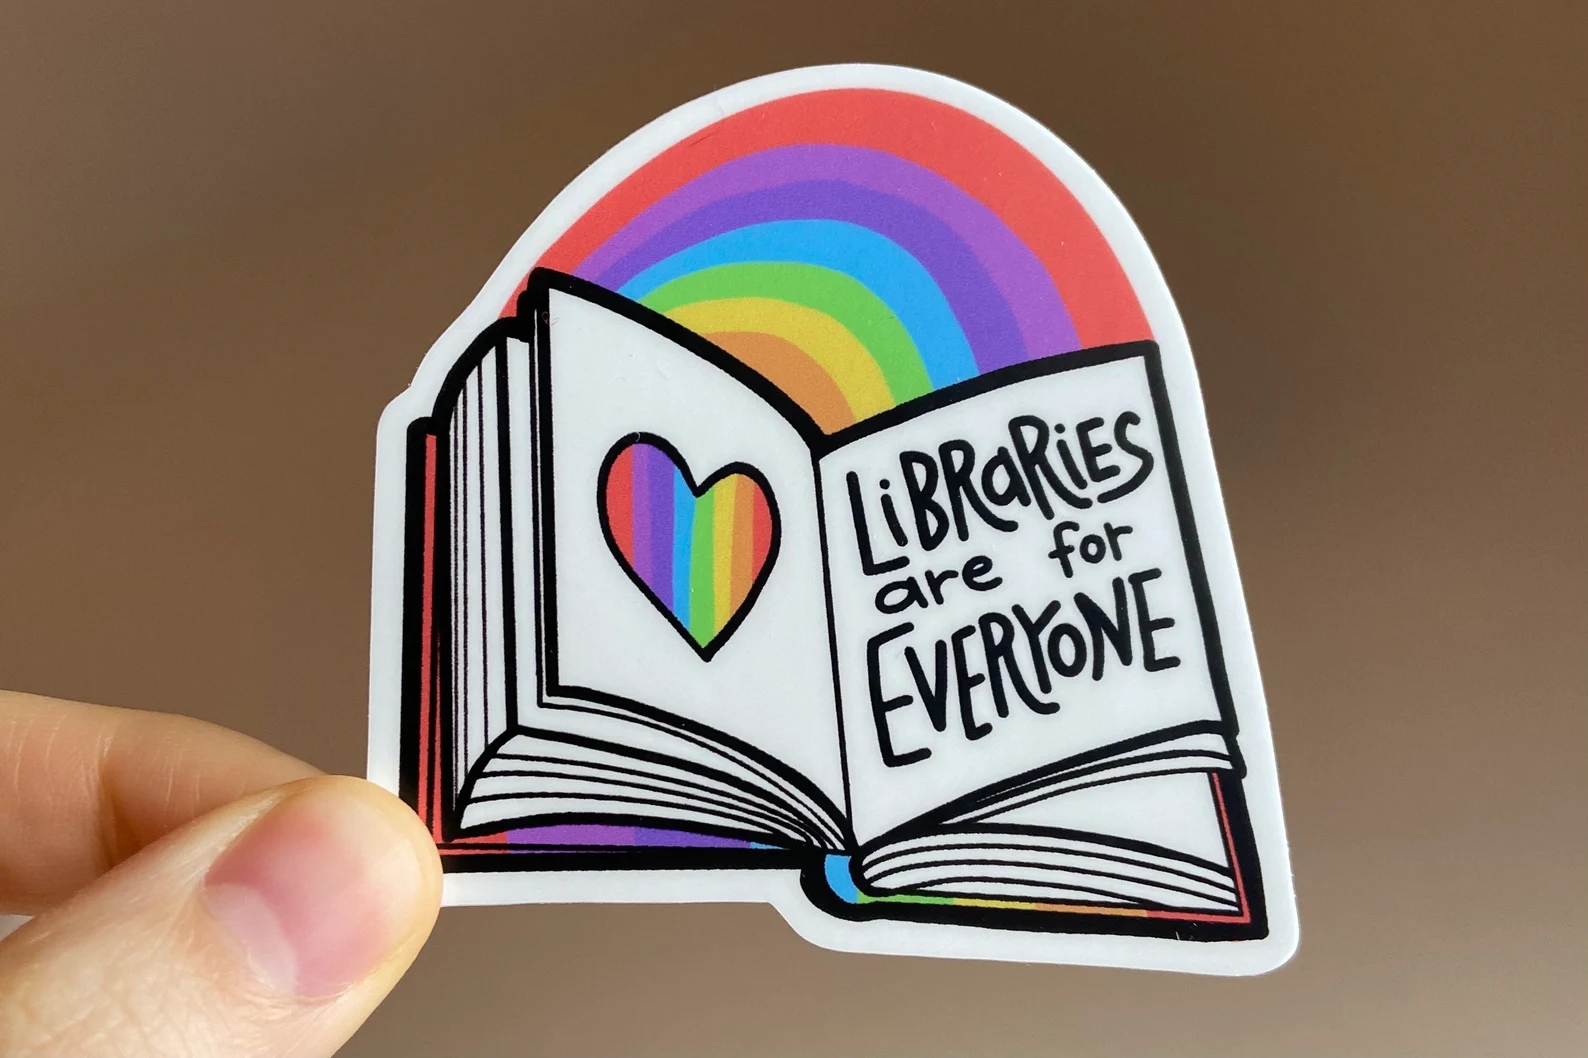 Image of a book with a rainbow behind it. On the book is the sentence "libraries are for everyone."